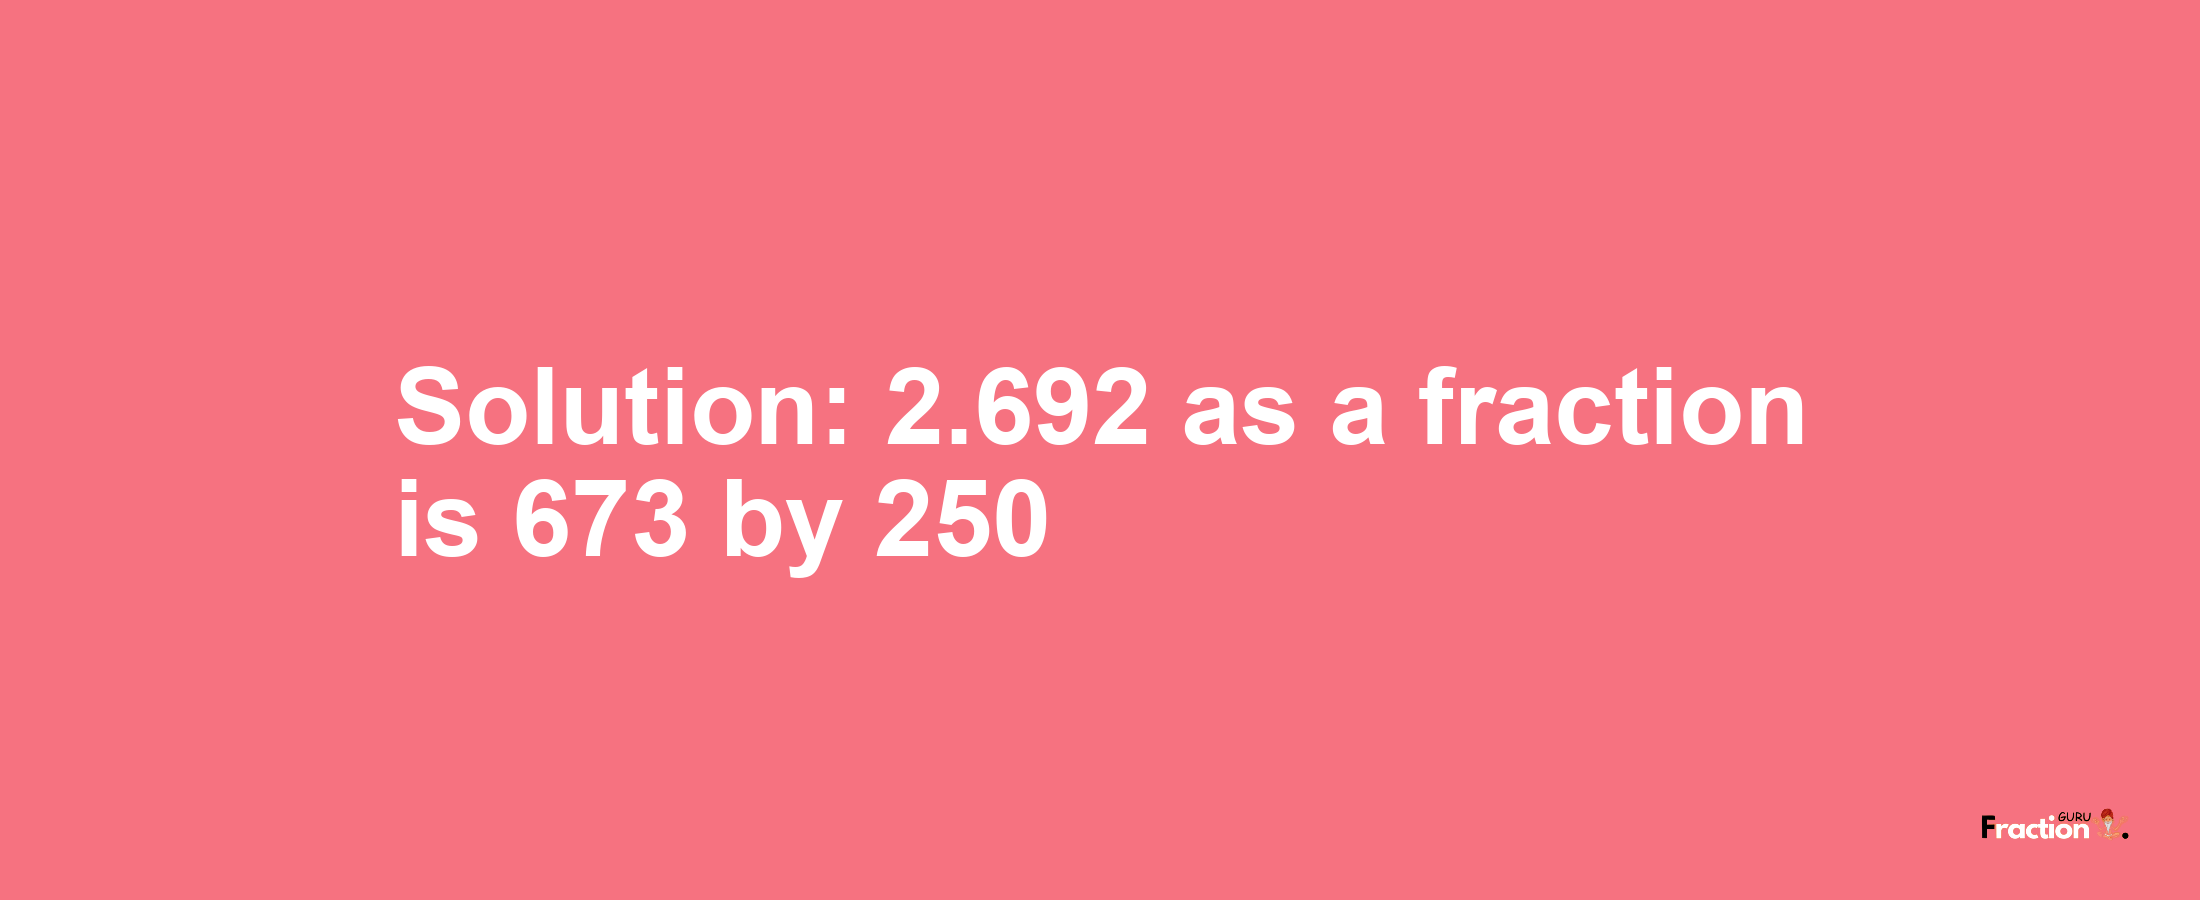 Solution:2.692 as a fraction is 673/250